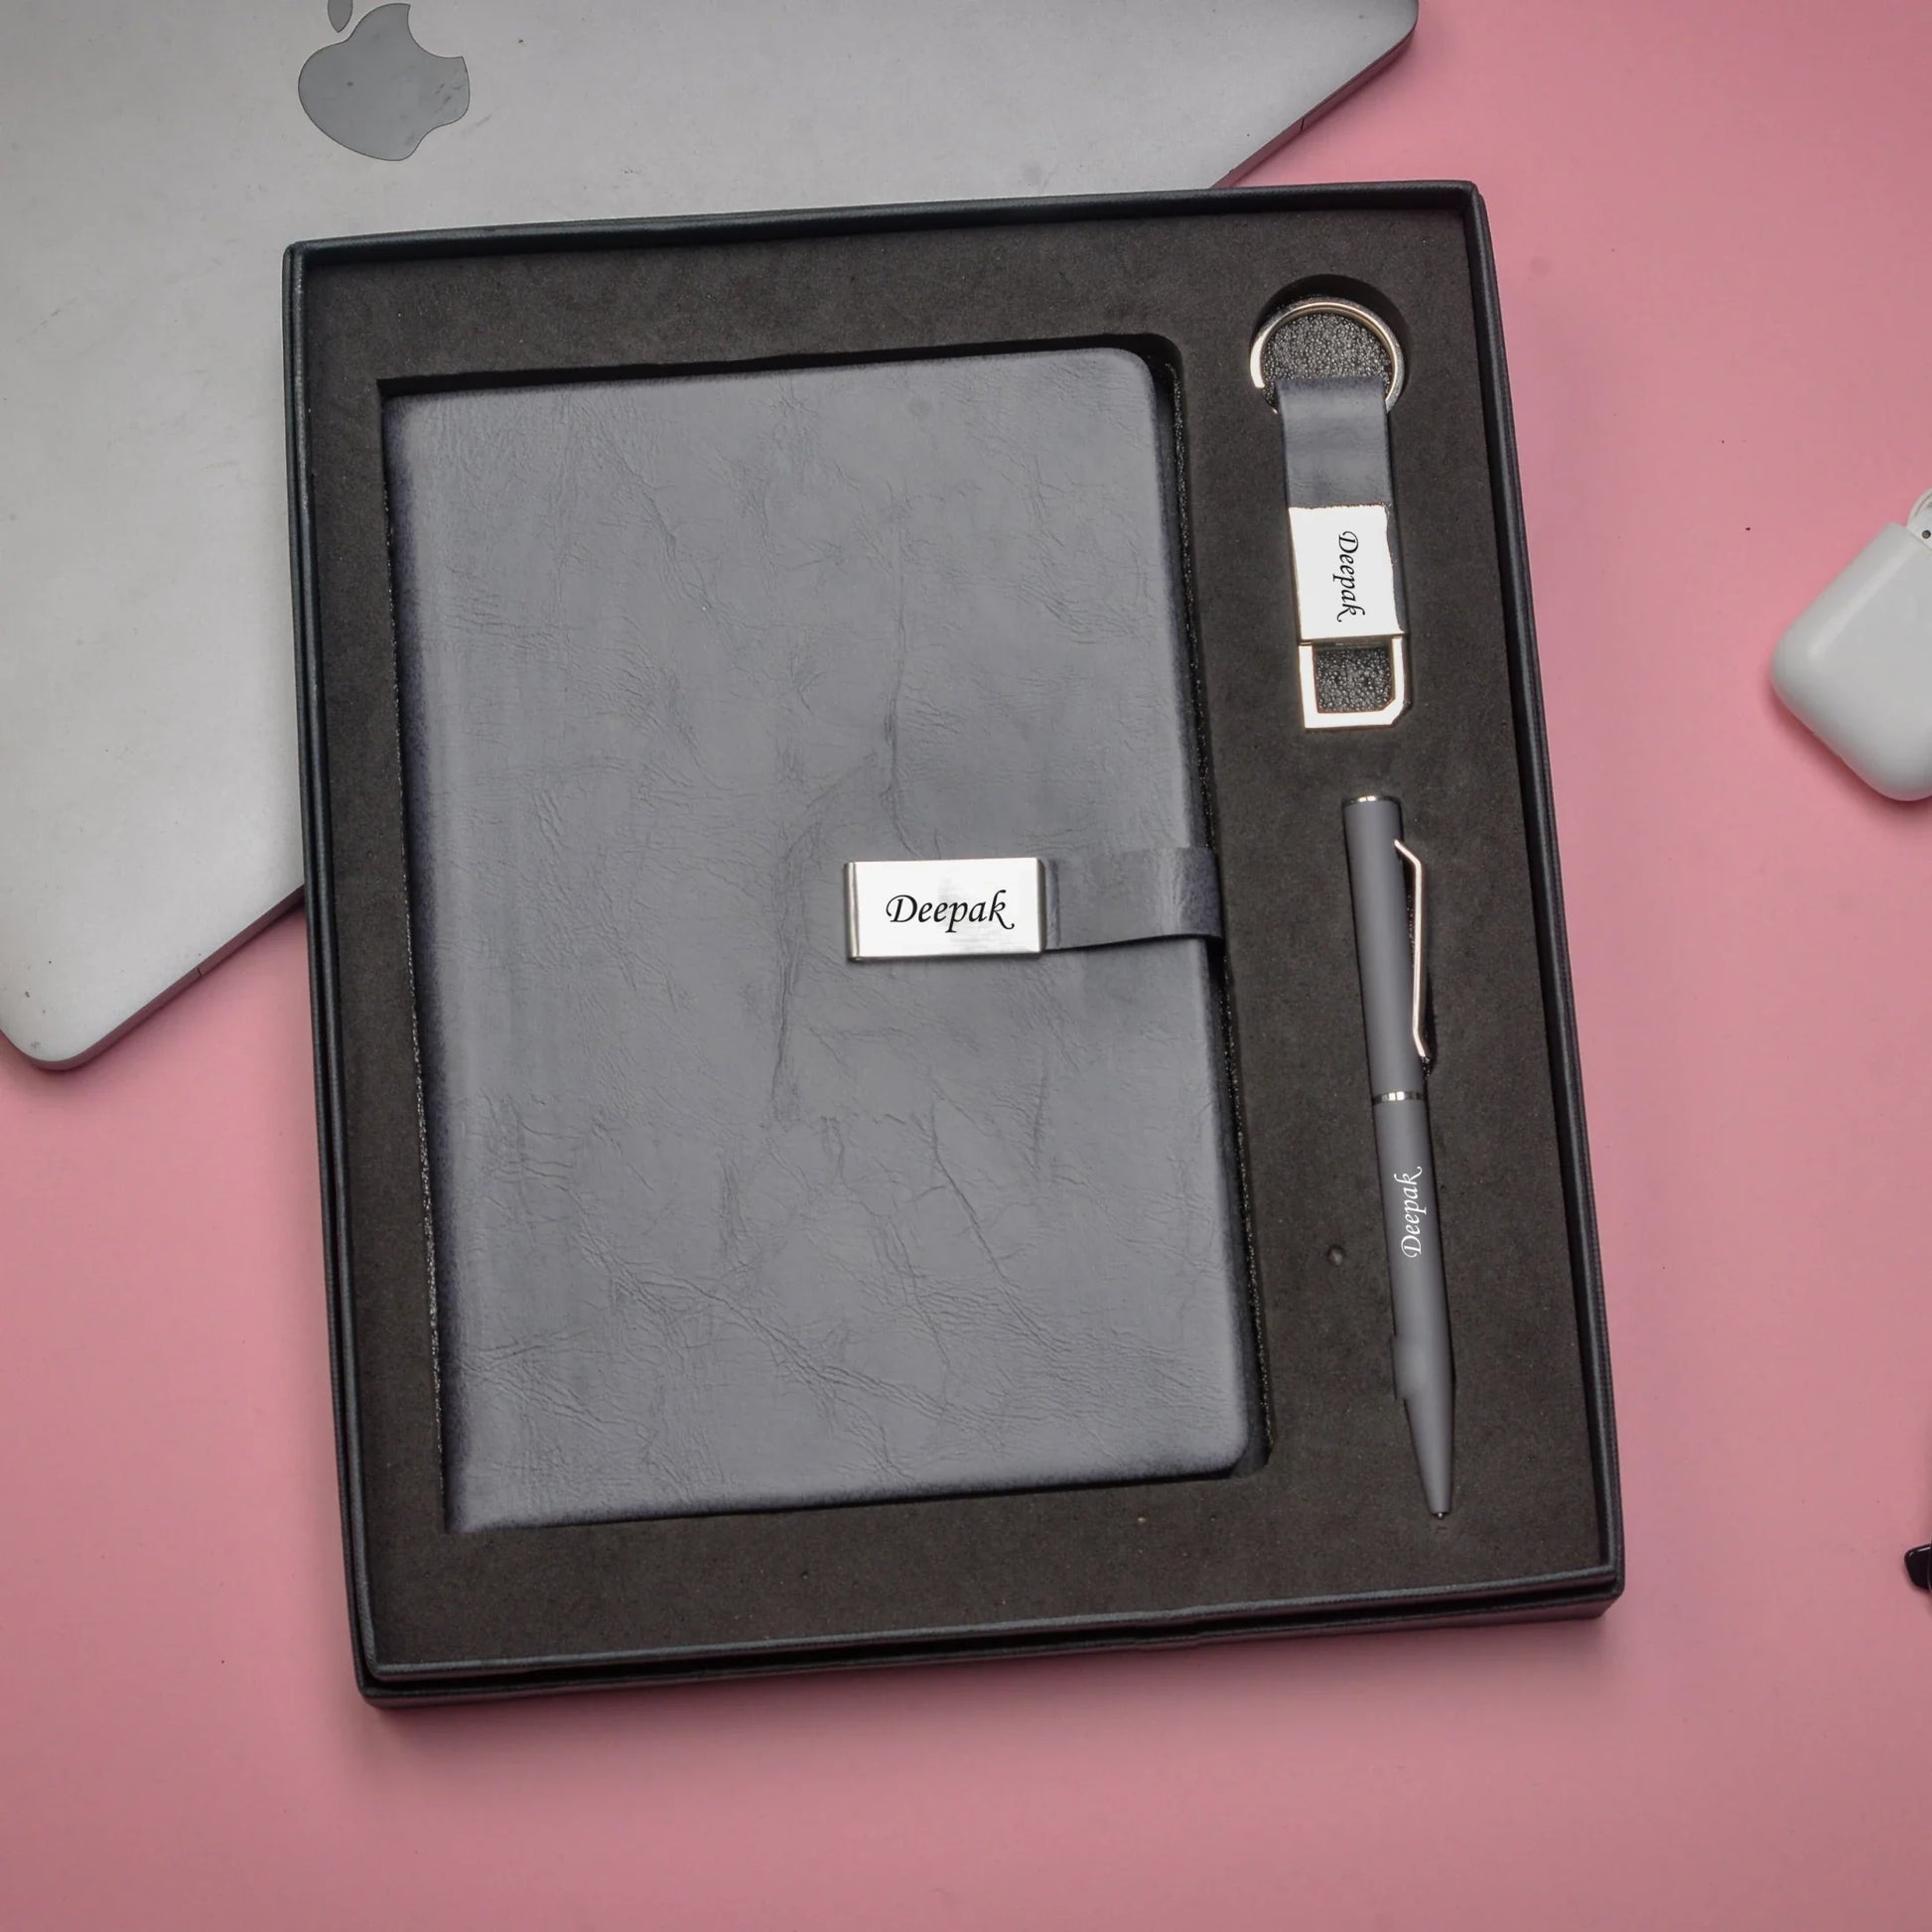 "Take your productivity to the next level with our advanced corporate set. Our innovative diary, high-tech pen, and cutting-edge keychain will keep you ahead of the curve."